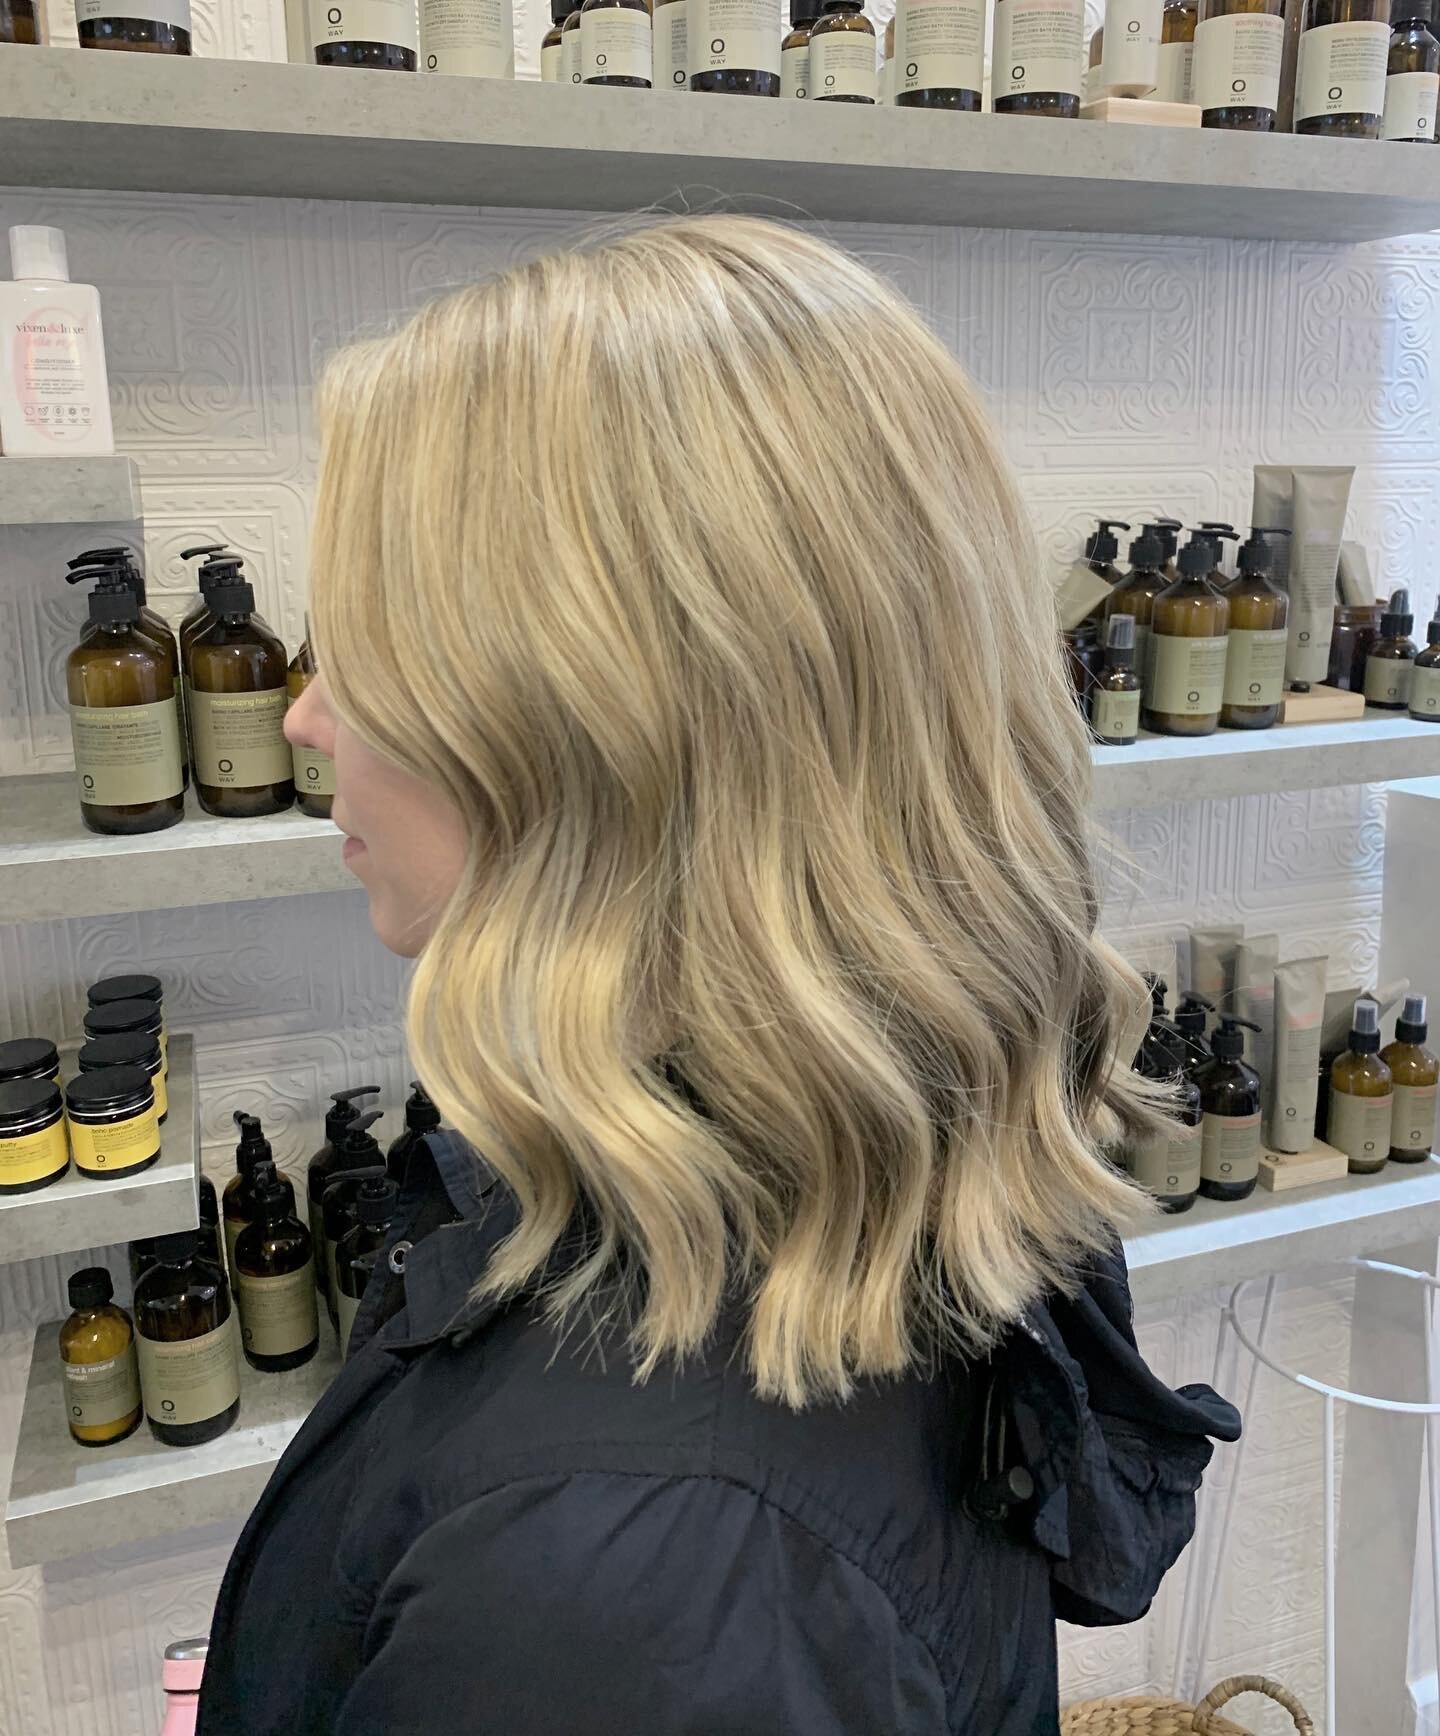 BABYLIGHHTS | BY ANNA

🤍 Beautiful creamy blonde for our lovely Isabella.
Hair by @anna_na_style ✨

#hair#hairstyle#haircolour#haircolor#oway#owaycolour#haircut#style#fashion#beauty#trend#2021#inspiration#stylist#hairdresser#owaysalon#newzealand#wel